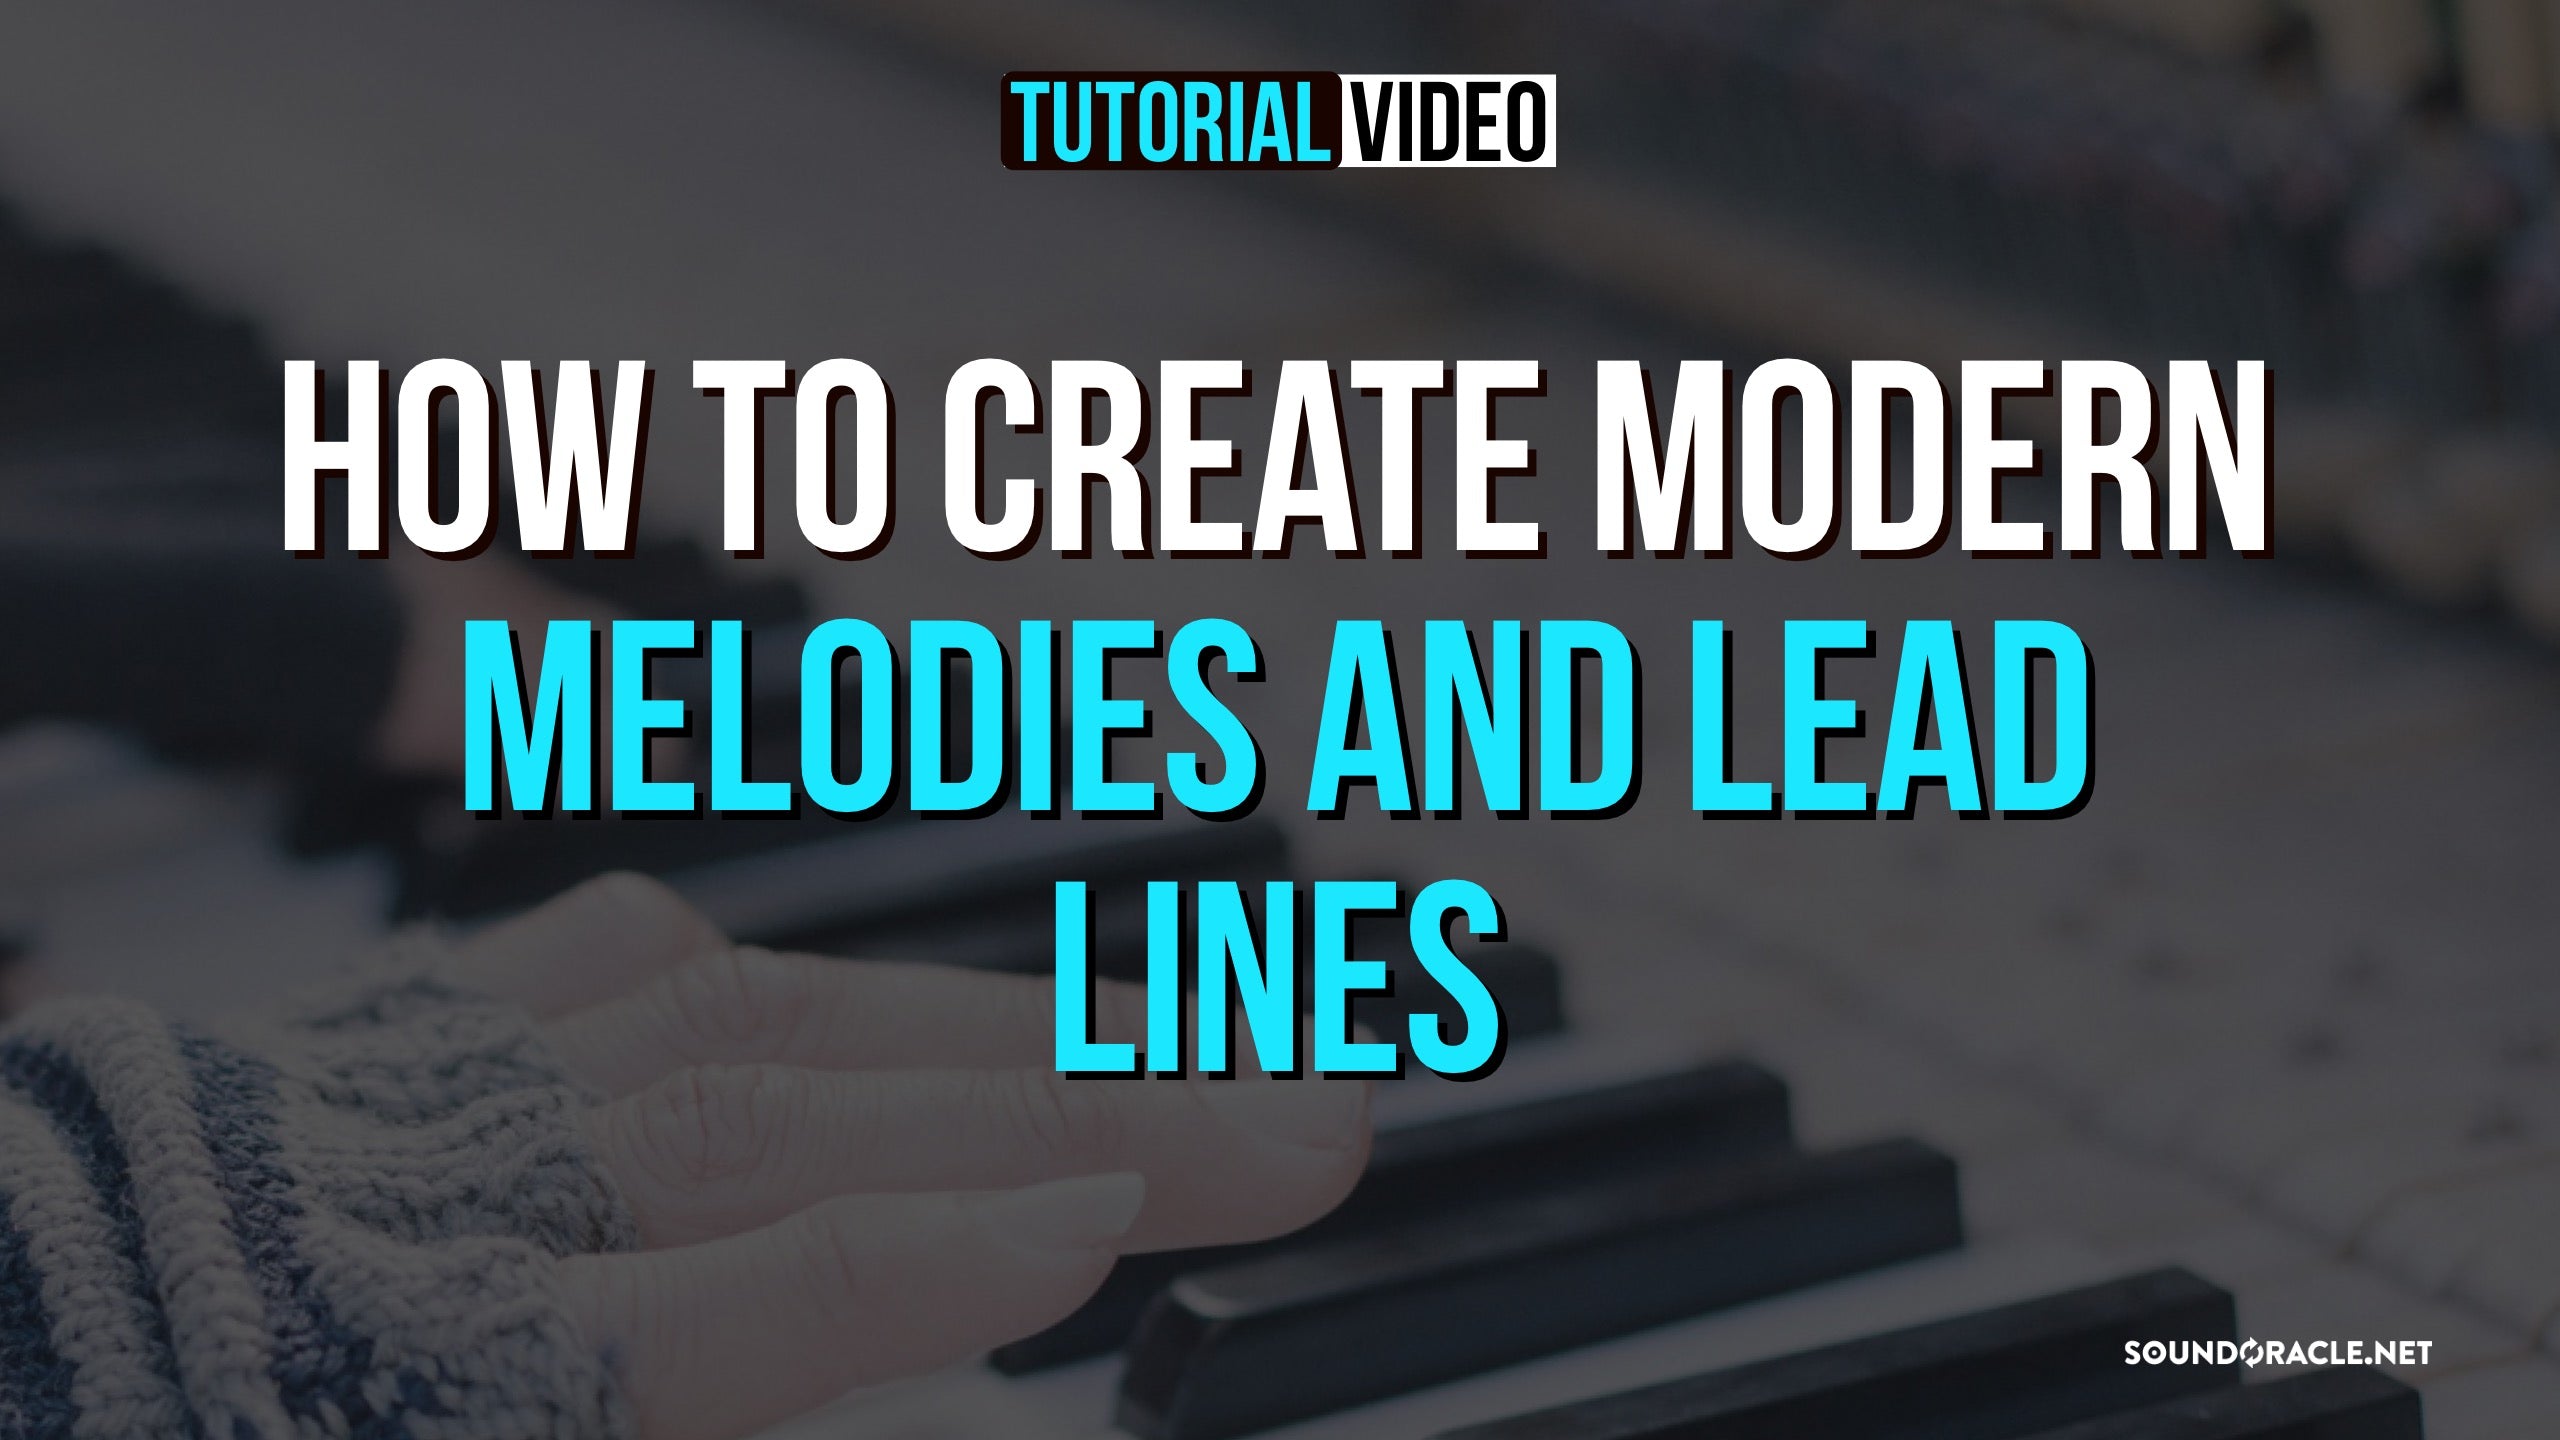 How To Create Modern Melodies And Lead Lines